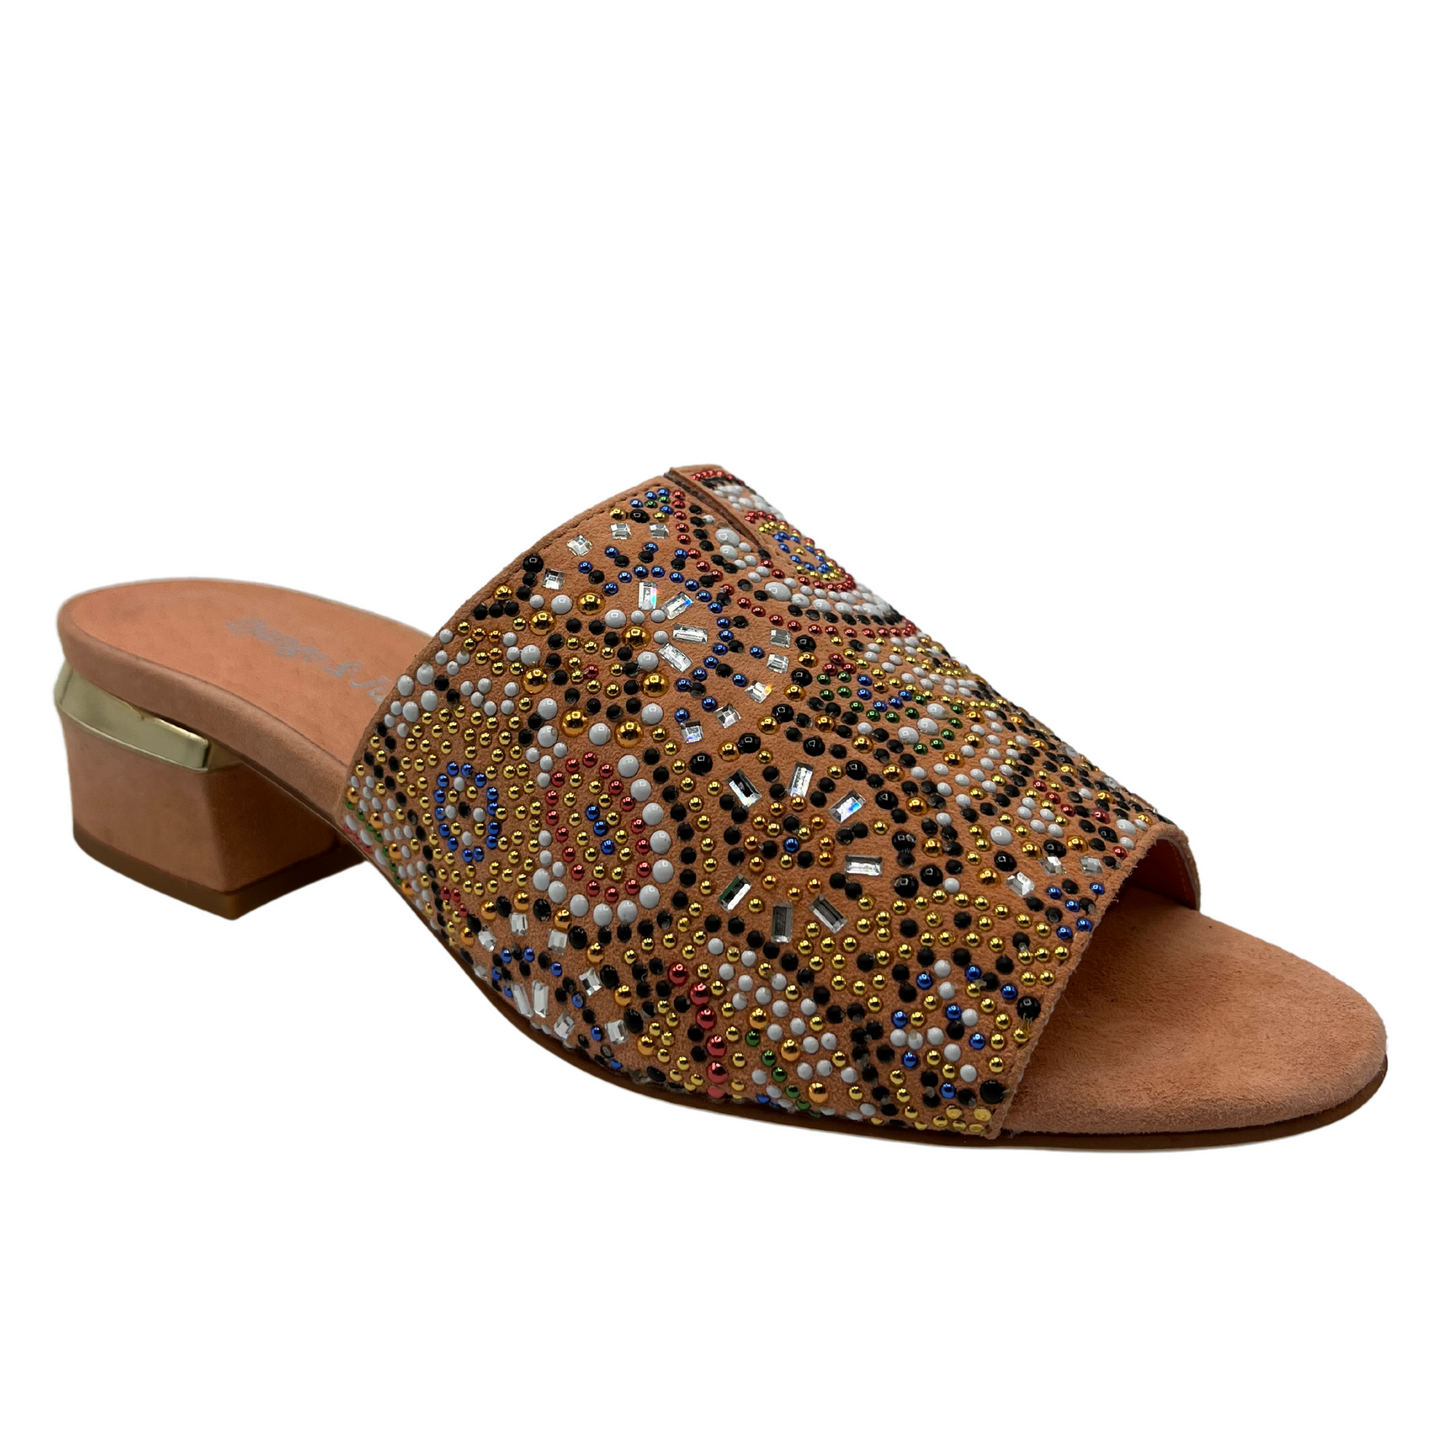 45 degree angled view of leather and suede mule sandal with beaded detail on upper